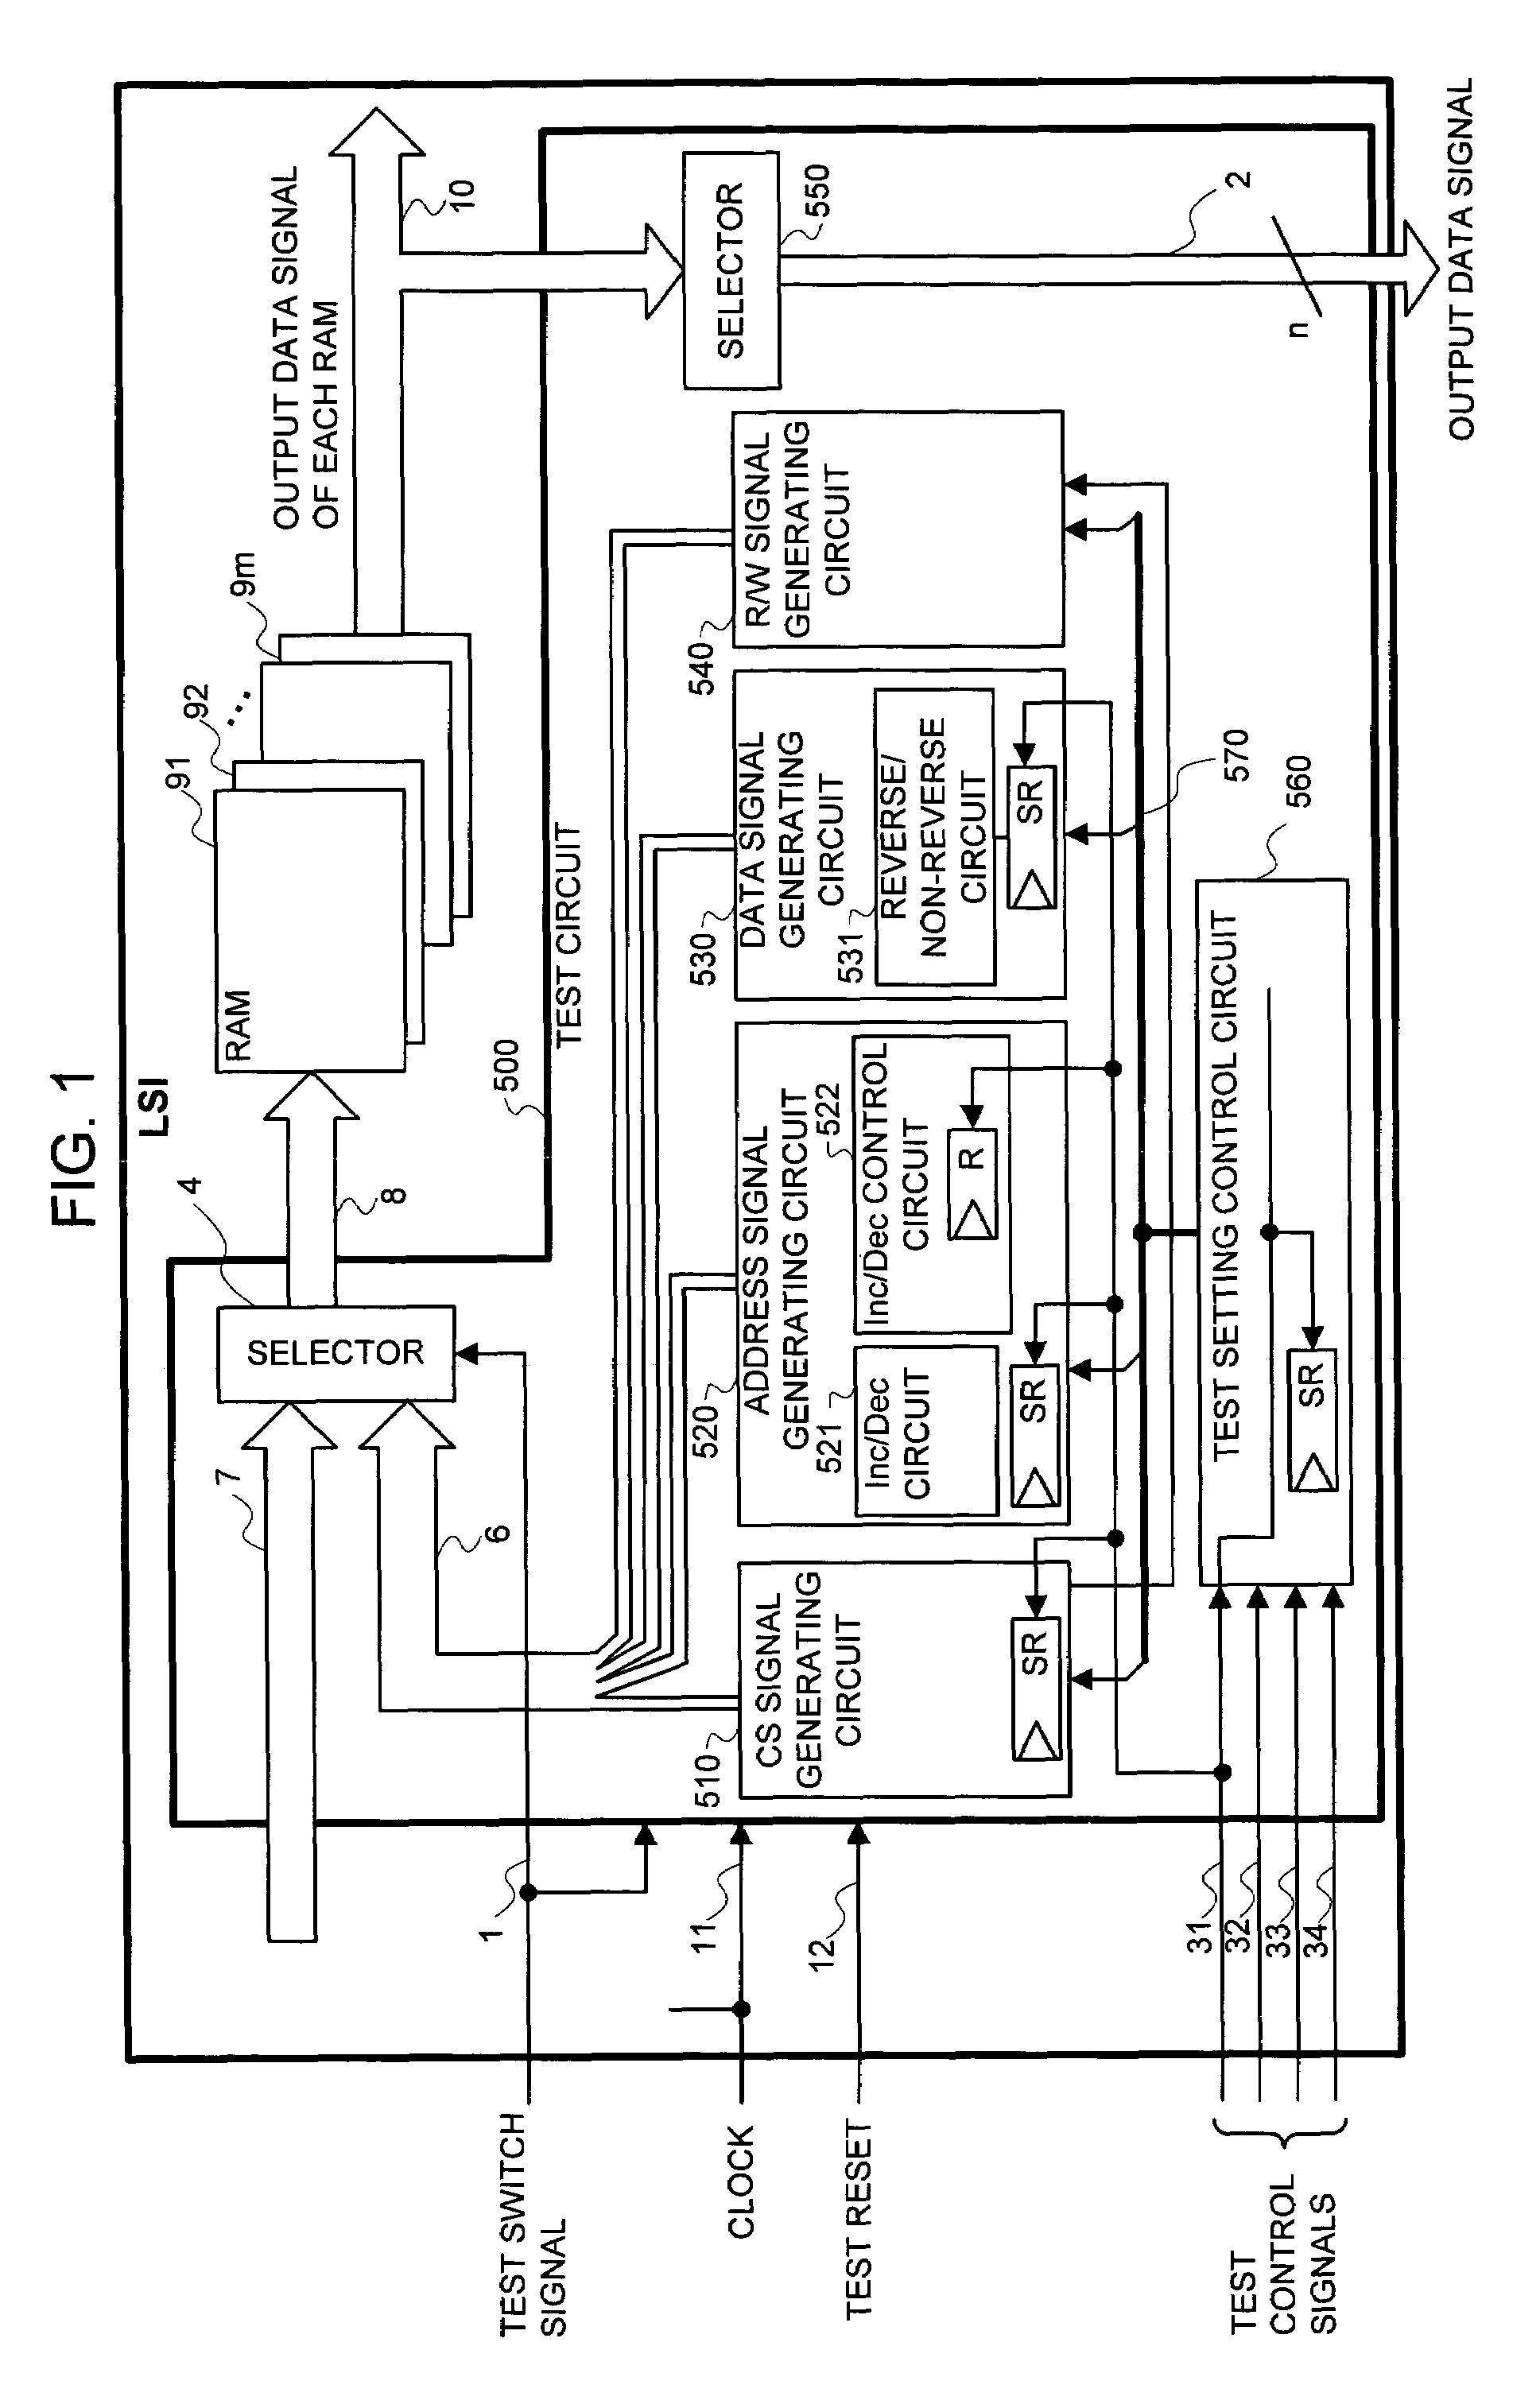 Test circuit for memory